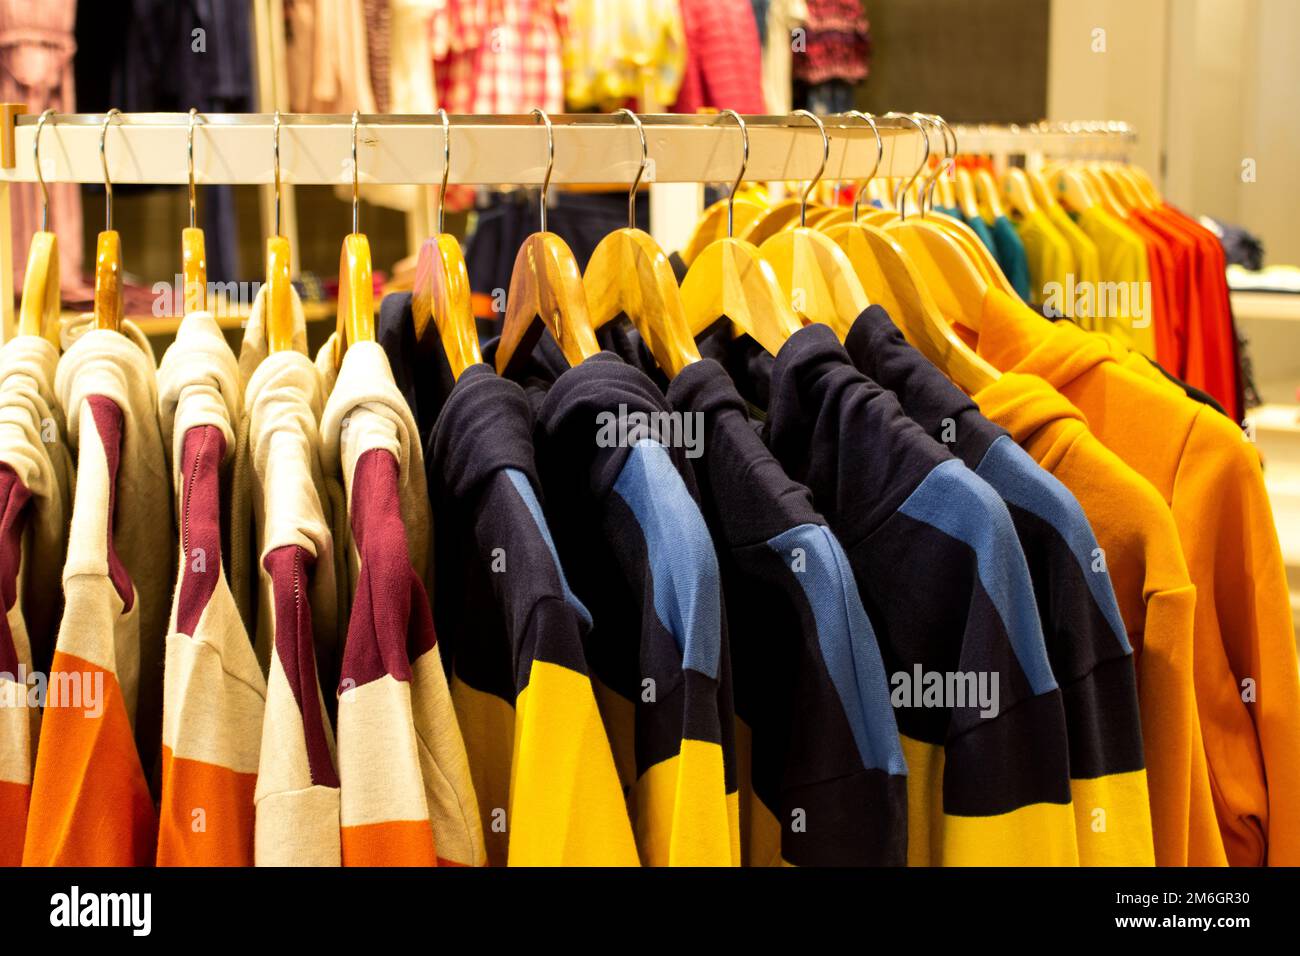 Shirt and pant hanging on hangers on a clothing rack and arranged in shelf in a modern clothe store Stock Photo